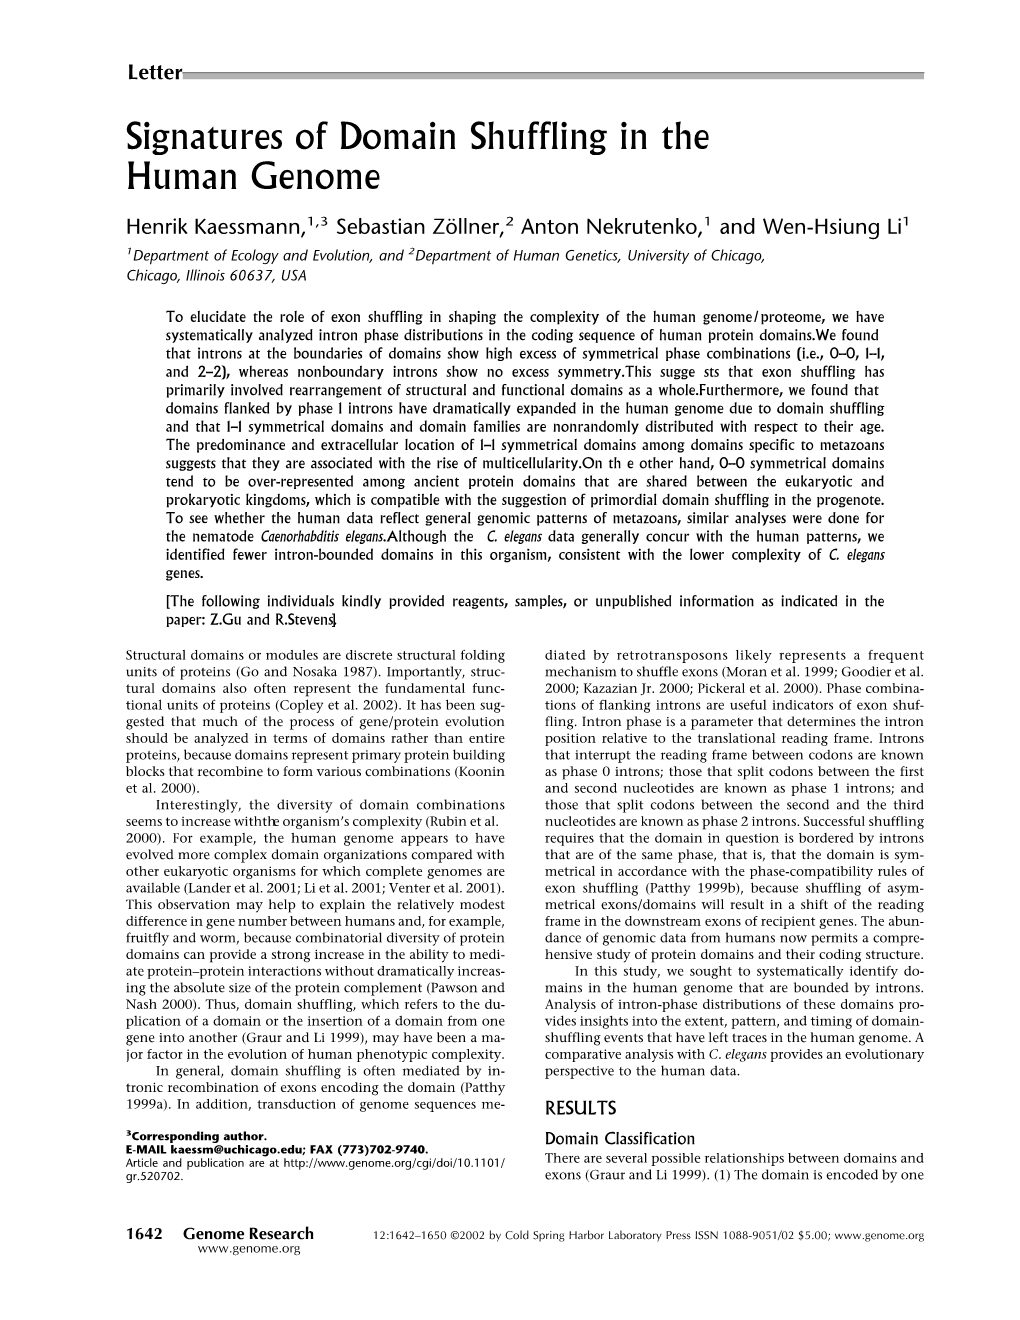 Signatures of Domain Shuffling in the Human Genome